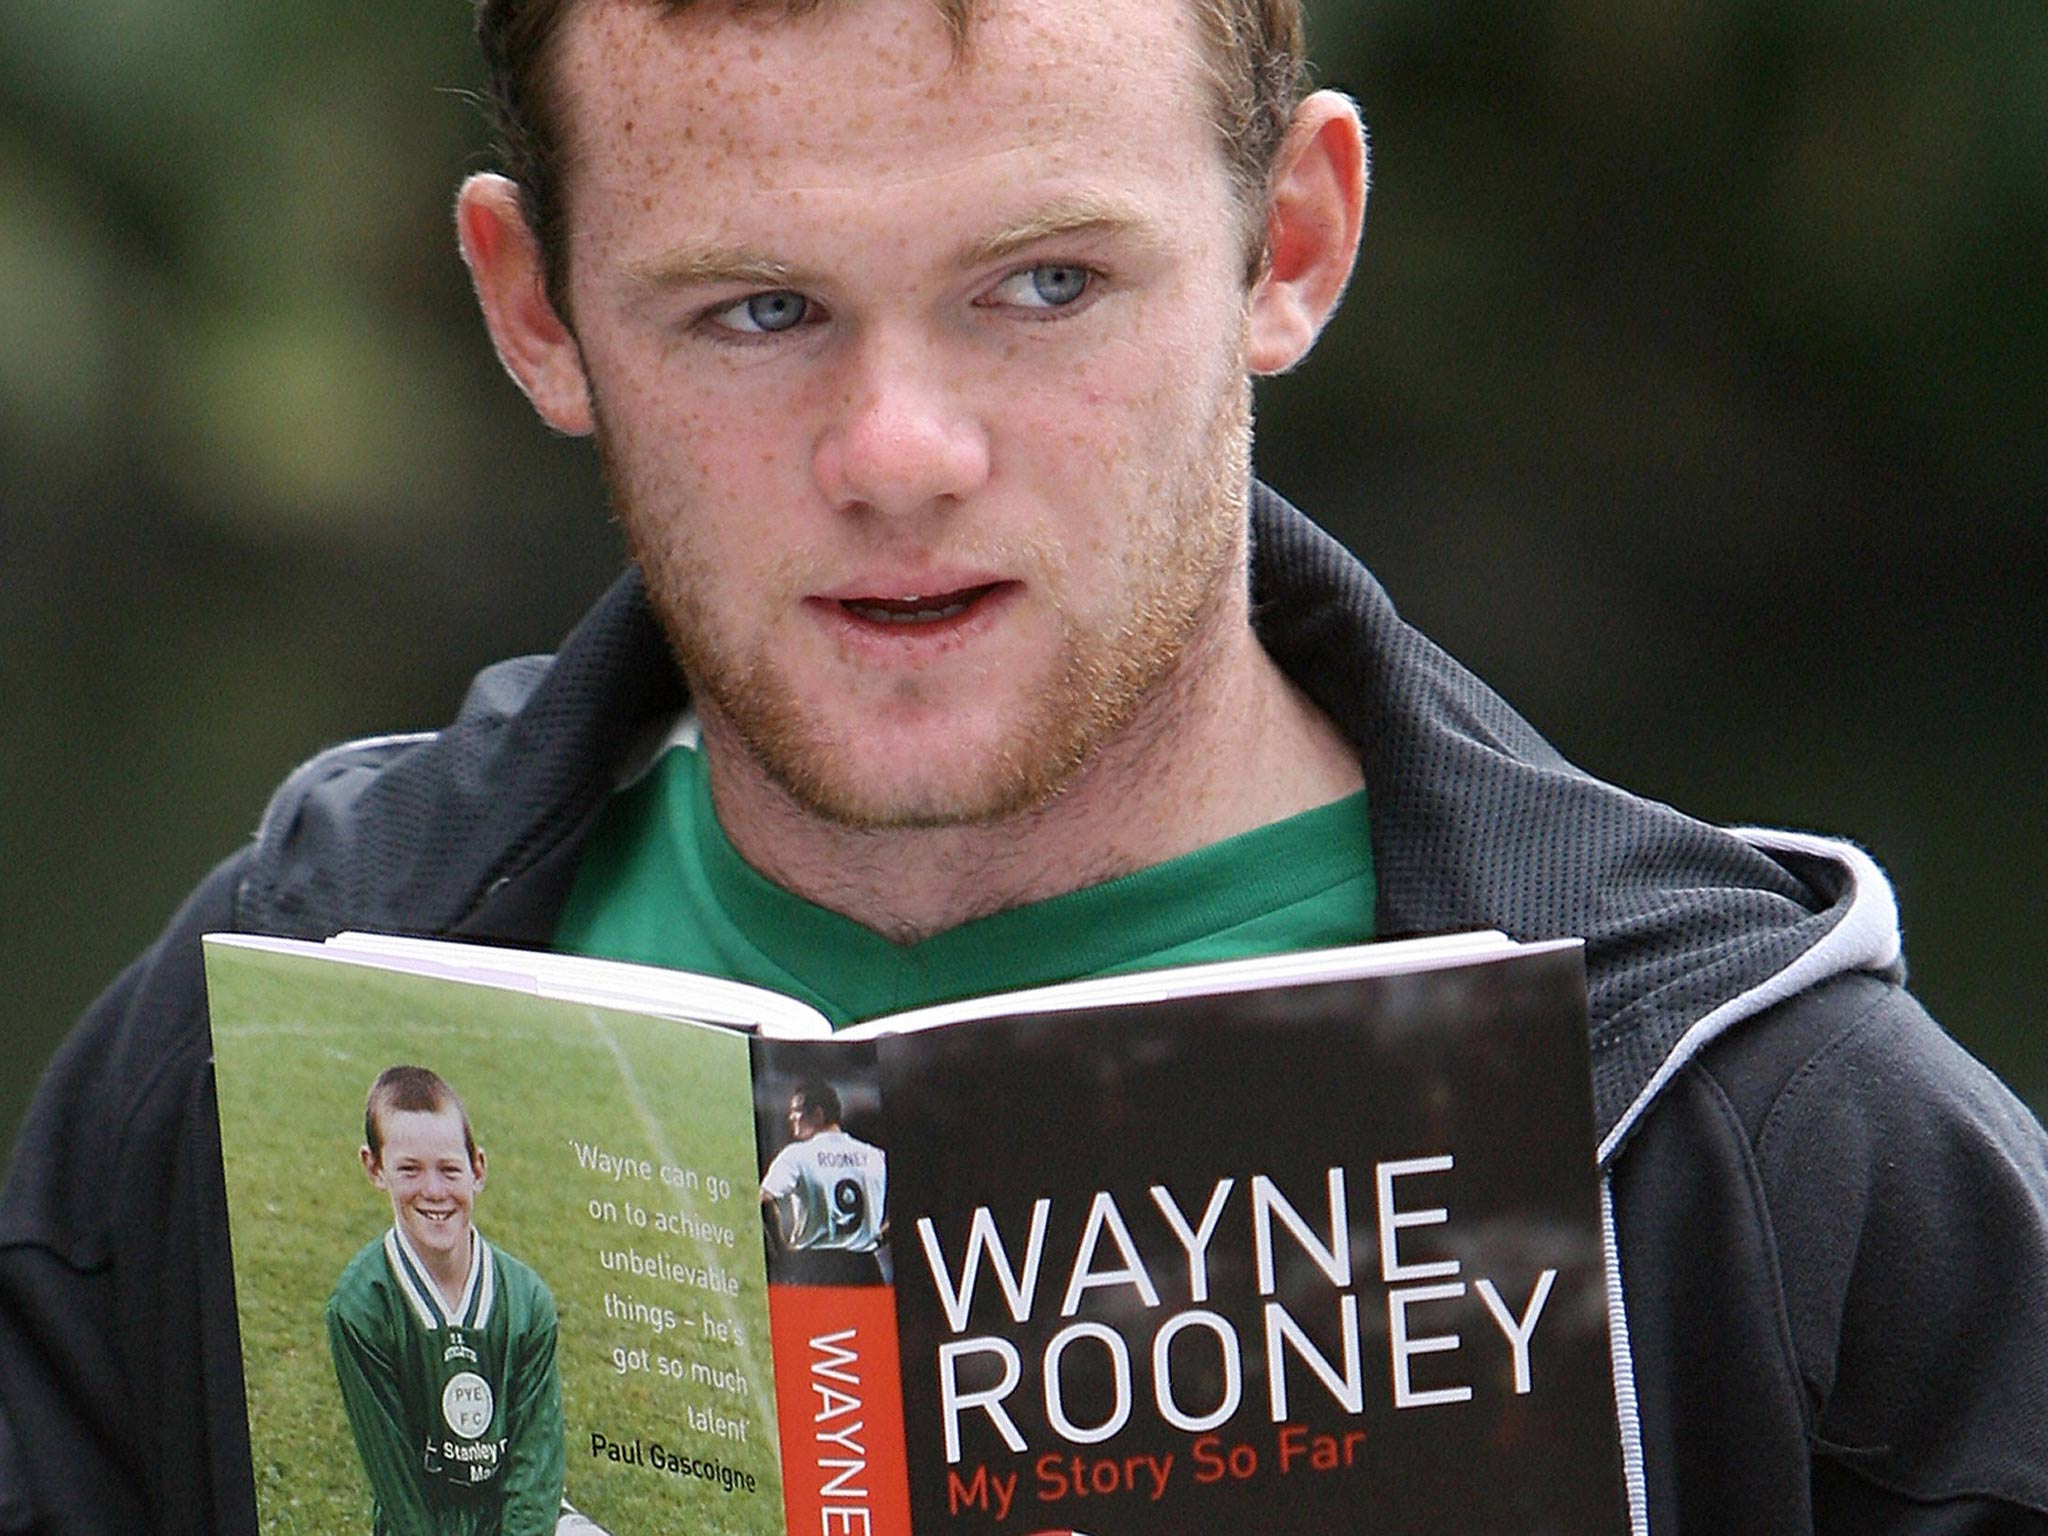 Manchester United striker Wayne Rooney launches his book 'My Story So Far'